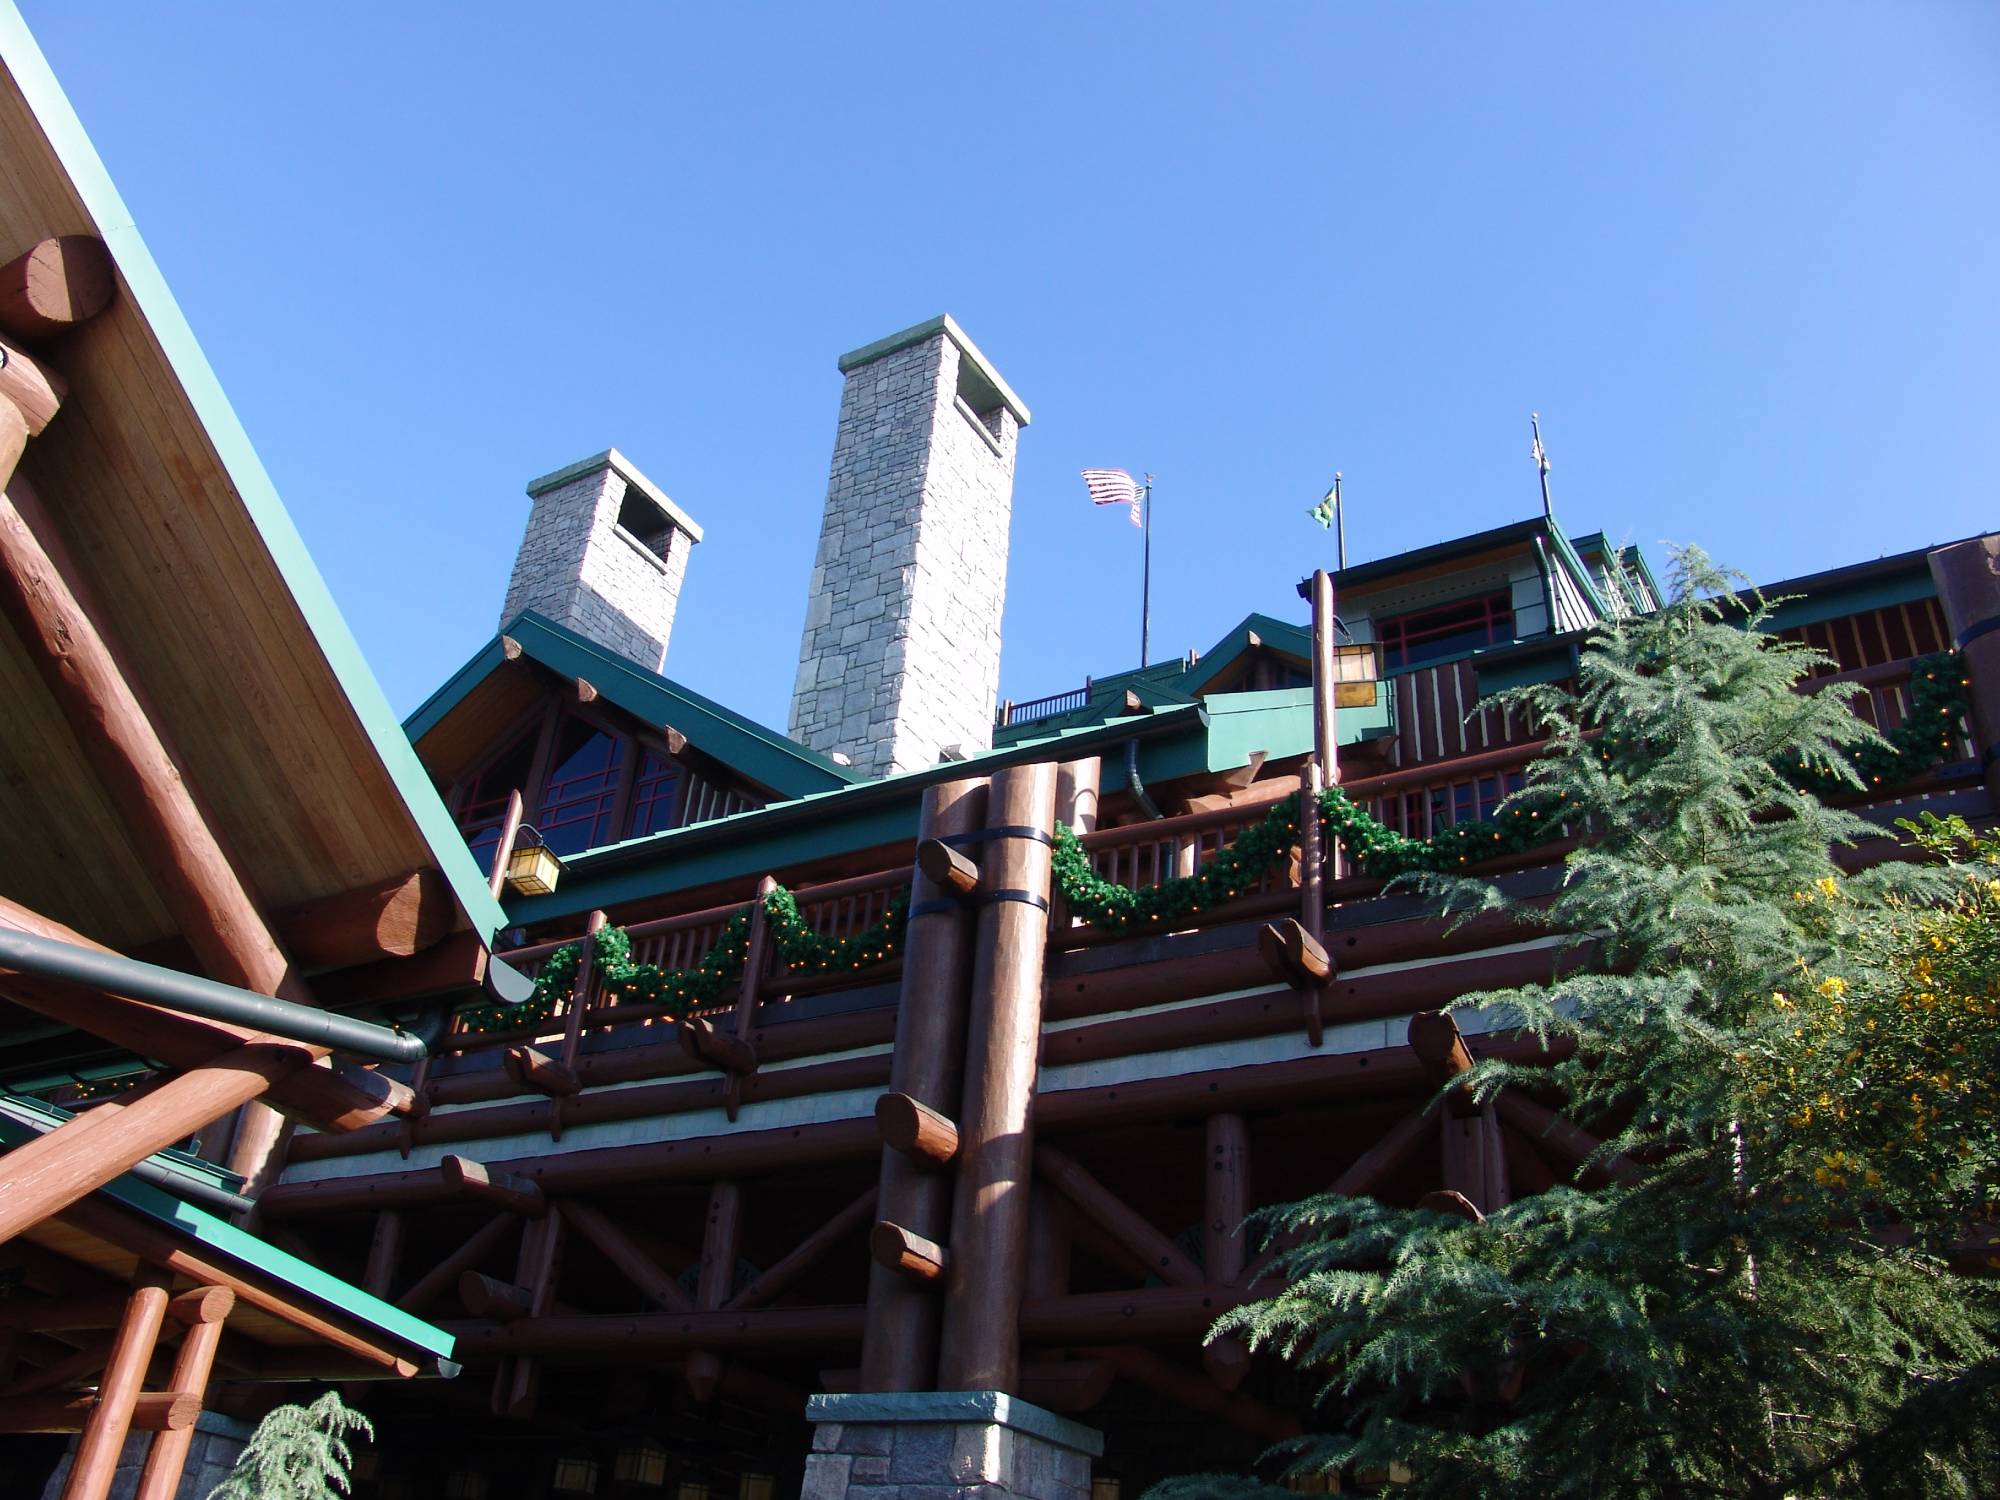 Wilderness Lodge - view from entrance